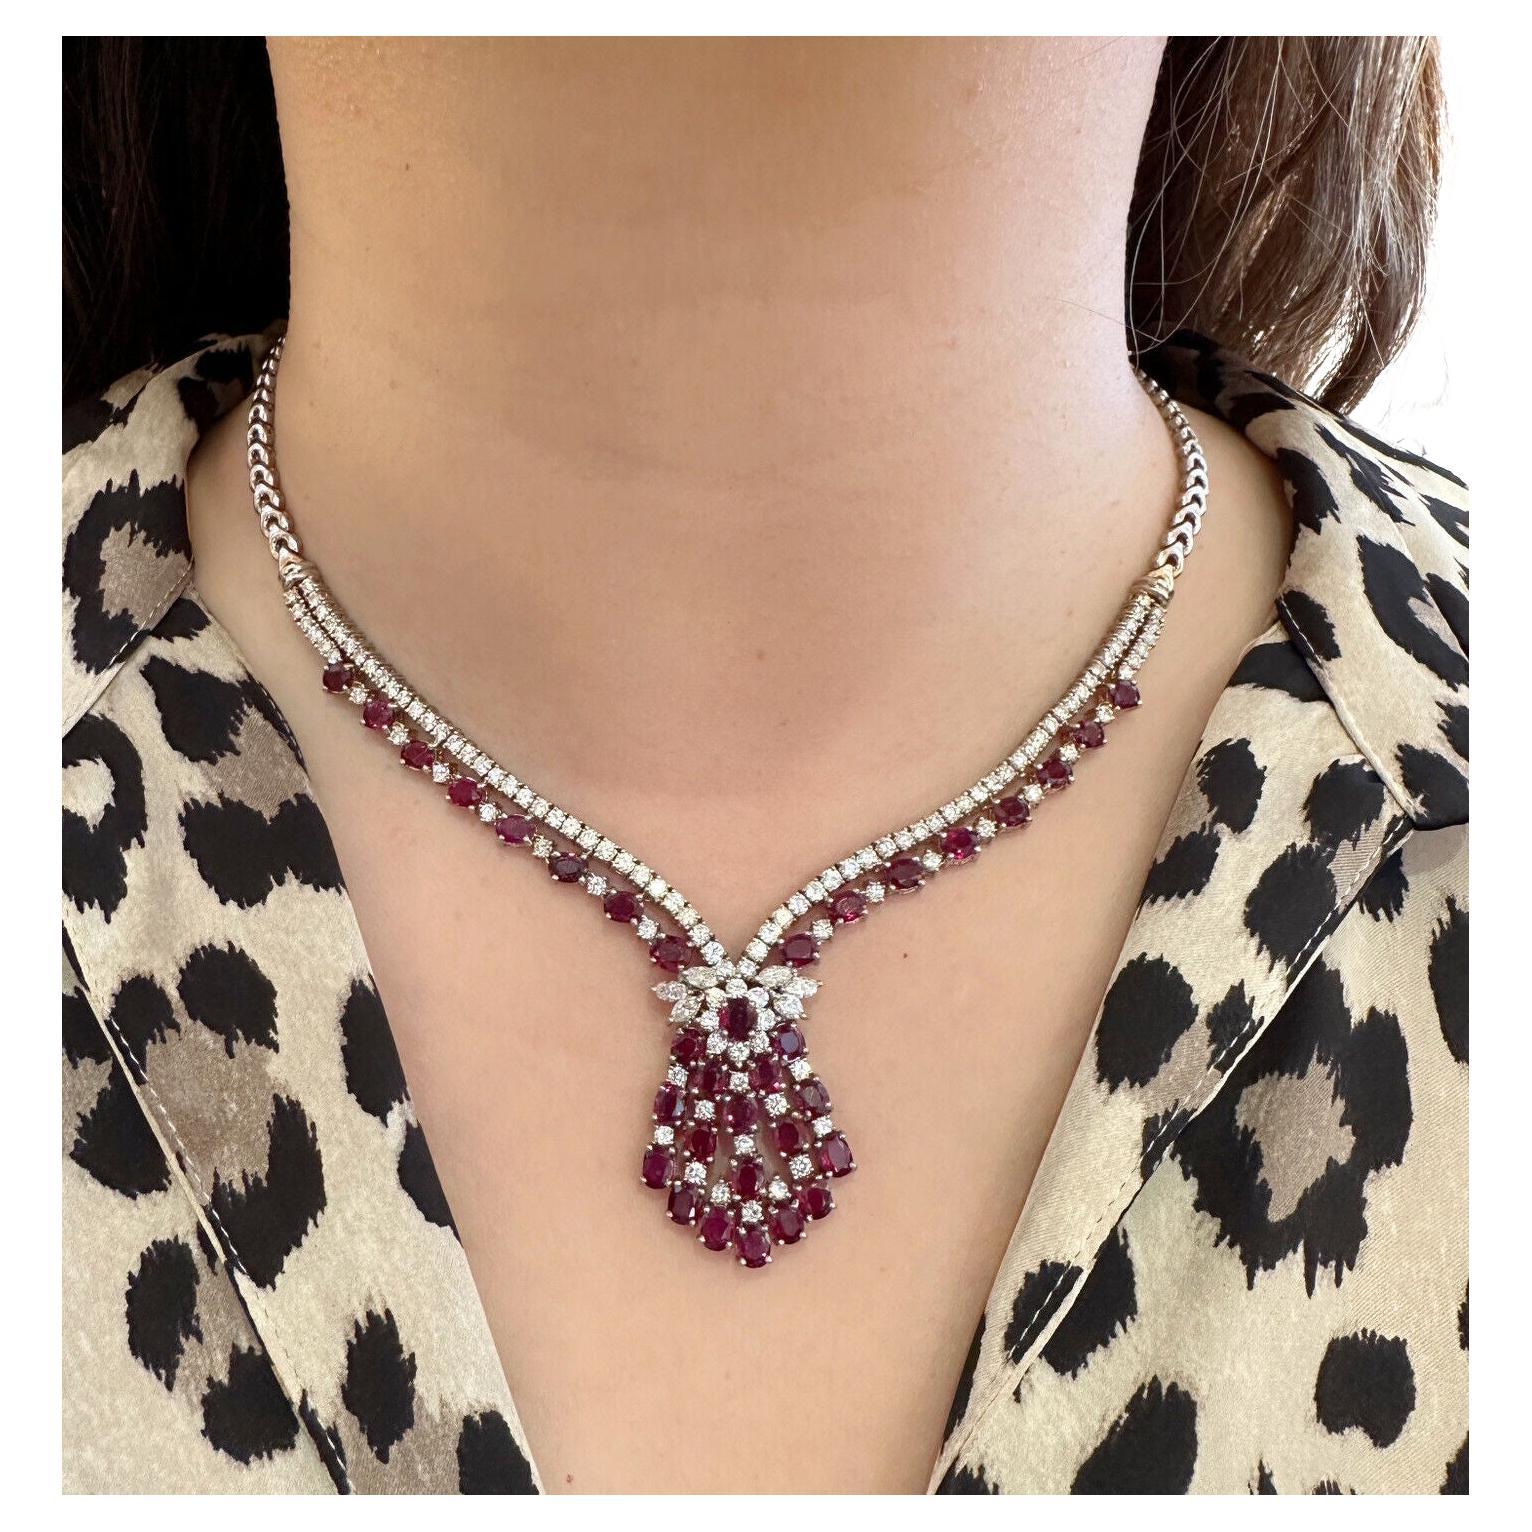 Vintage Ruby and Diamond Necklace in 18k White Gold 

Ruby and Diamond Necklace features Oval Red Rubies set in Tassel Design accented with Round Brilliant and Marquise Diamonds in 18k White Gold.

Total weight of stones is approximately 10.00